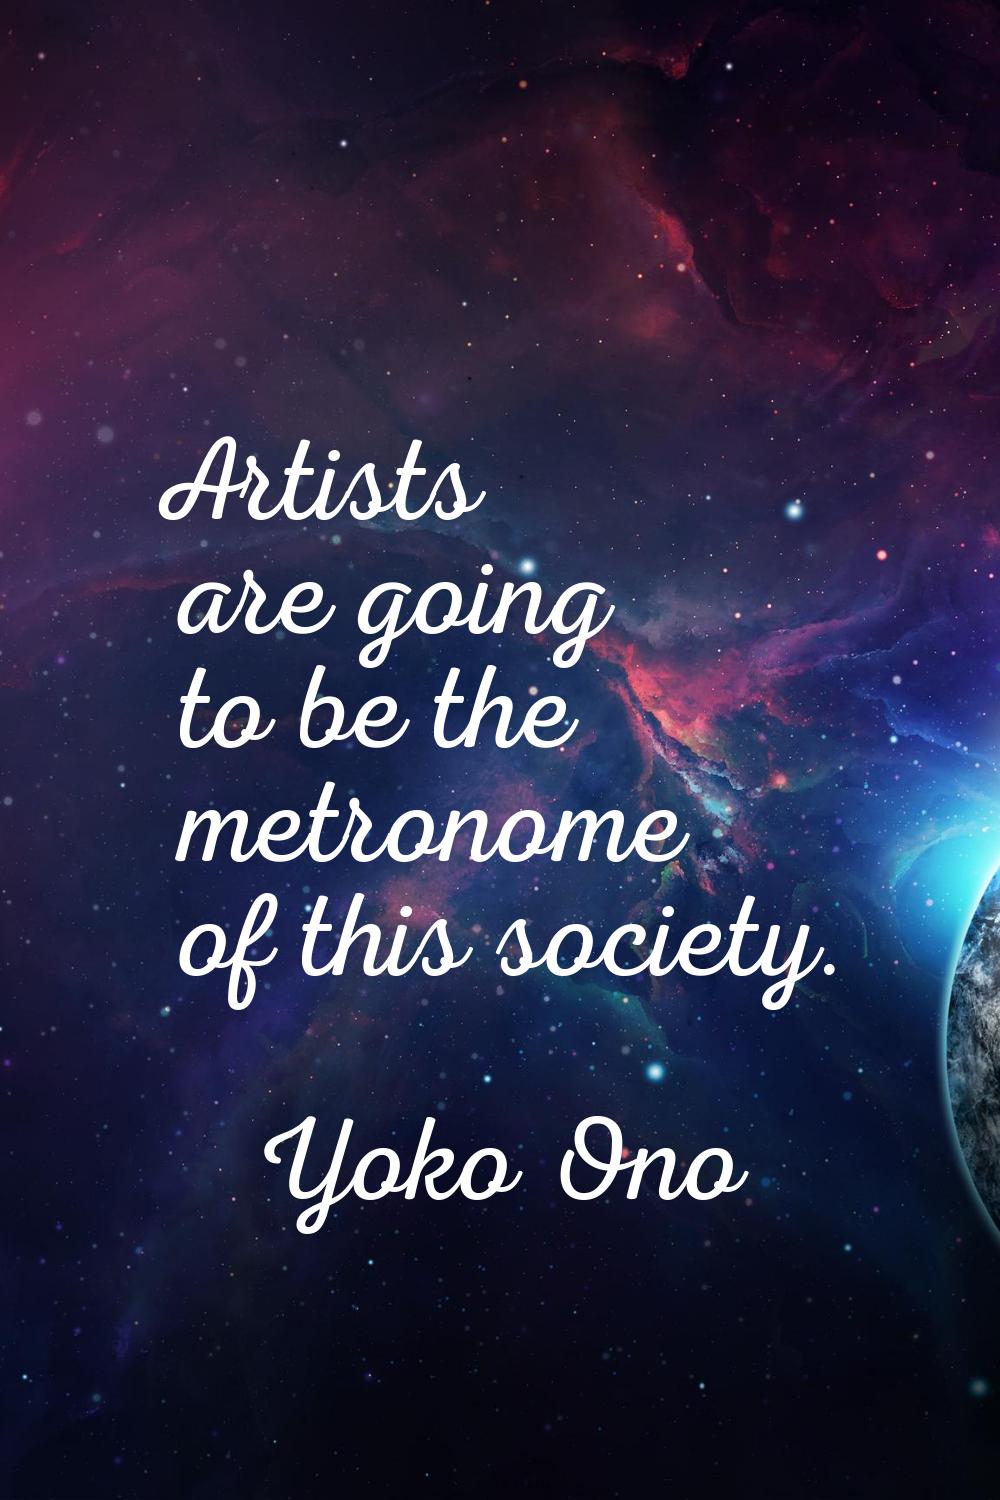 Artists are going to be the metronome of this society.